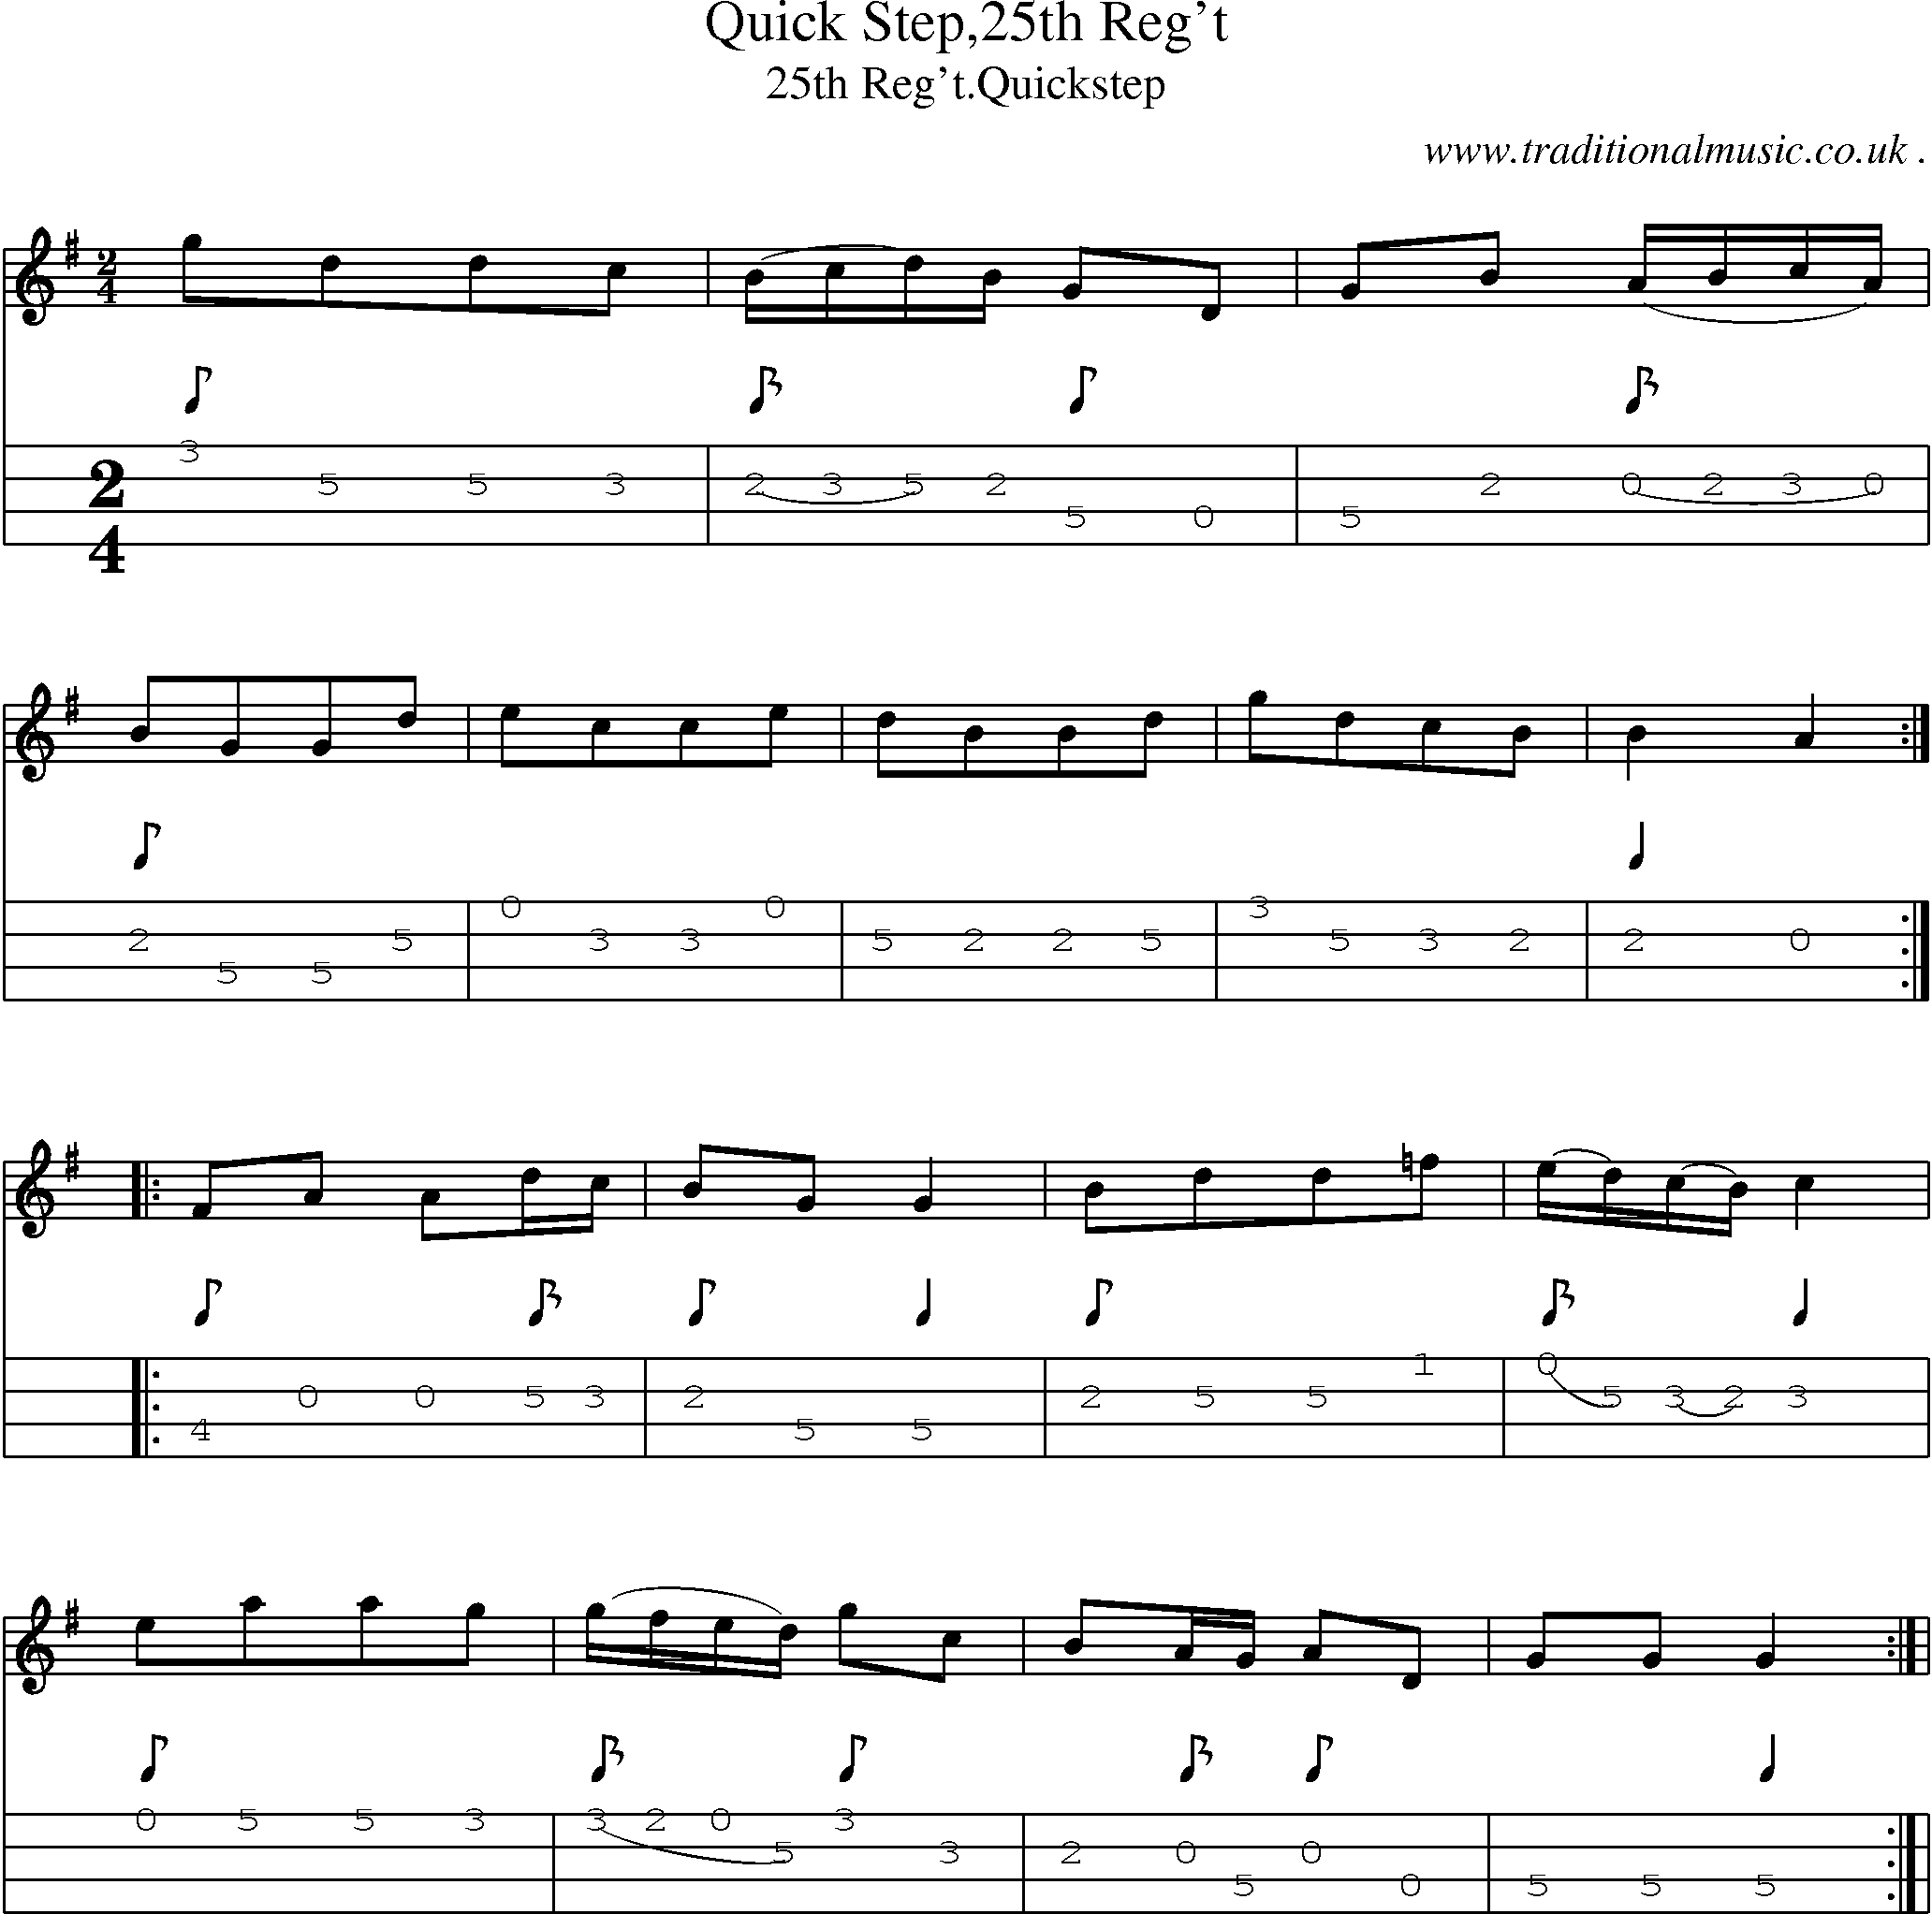 Sheet-Music and Mandolin Tabs for Quick Step25th Regt